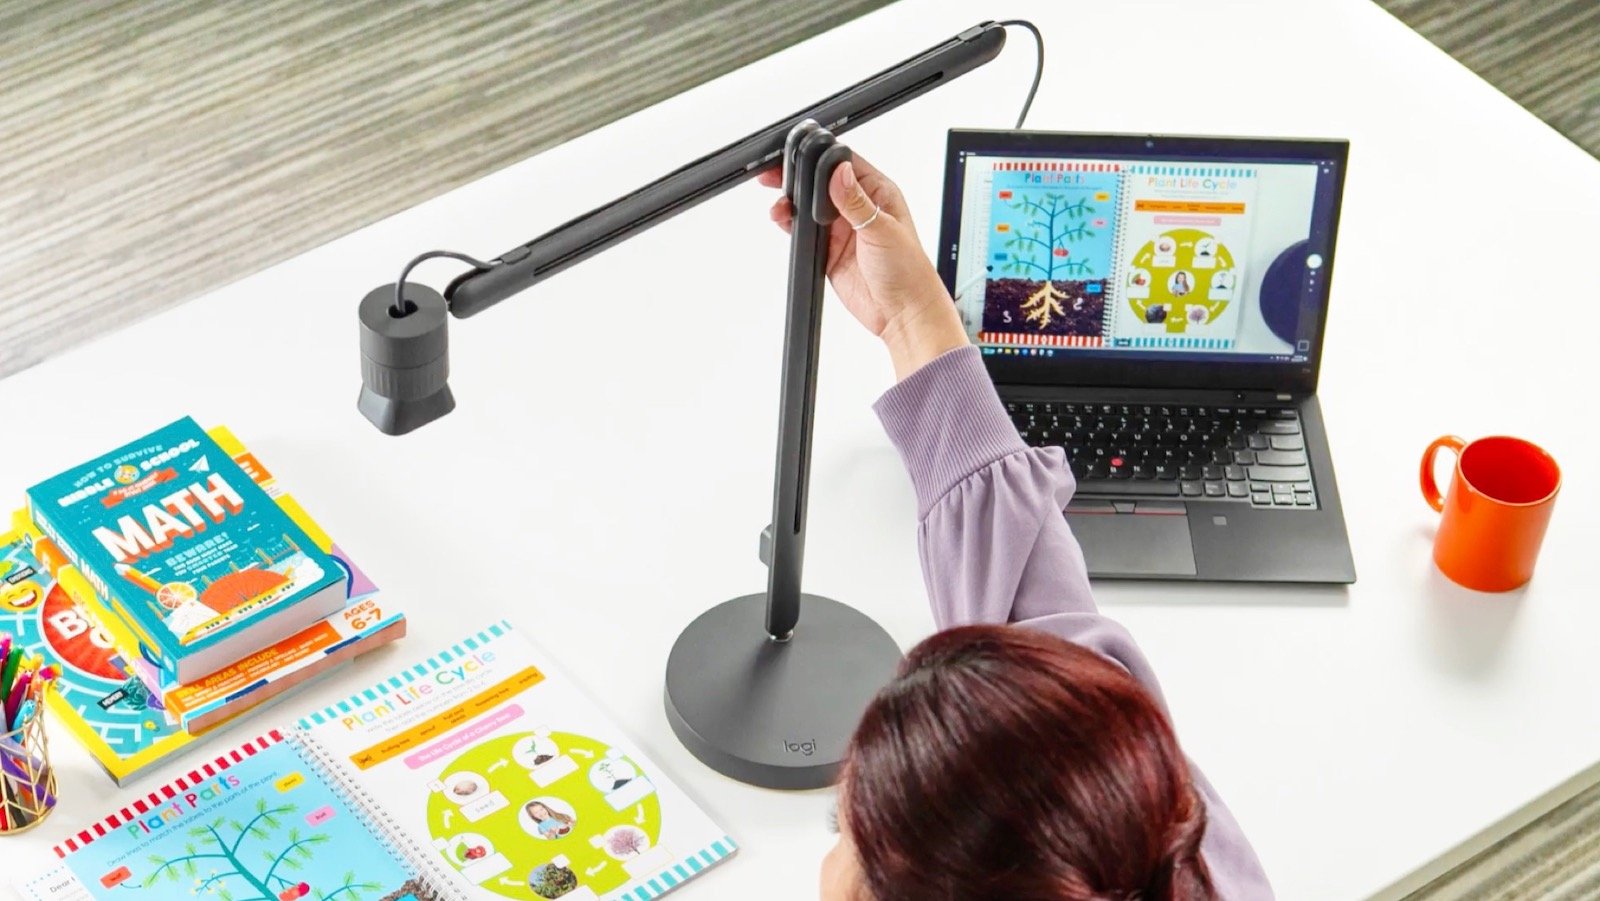 Logitech Reach articulating camera allows you to easily show what’s on your workspace